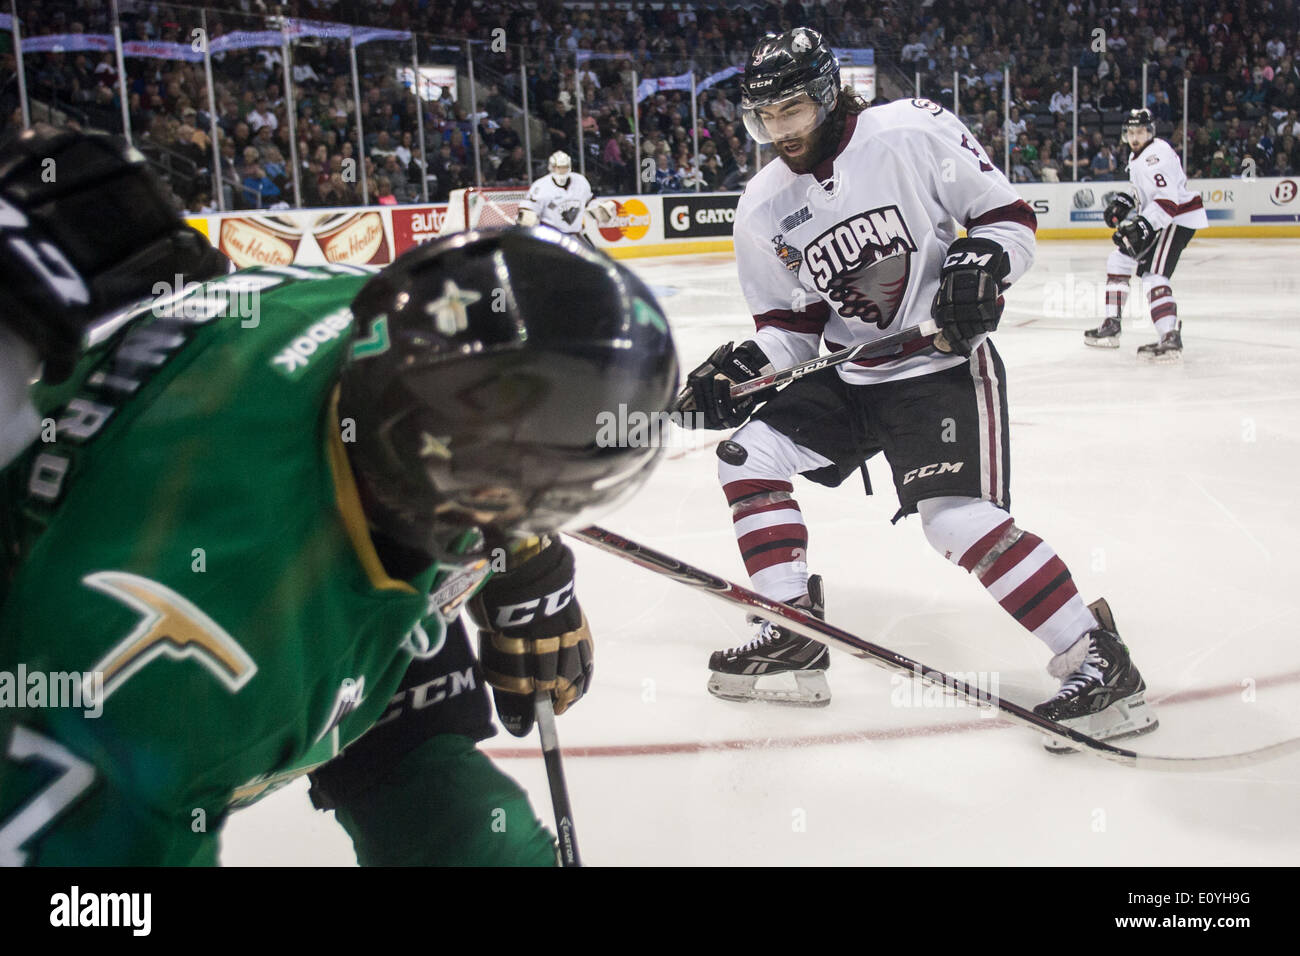 London, Ontario, Canada. 19th May, 2014. Guelph Storm player Phil Baltisberger reacts to the puck being freed from the boards during their game against the Val-d'Or Foreurs at the 2014 Memorial Cup in London Ontario, Canada on May 19, 2014. Guelph went on to beat Val d'Or by a score of 6-3 to be the only undeated team in the tournament. Credit:  Mark Spowart/Alamy Live News Stock Photo